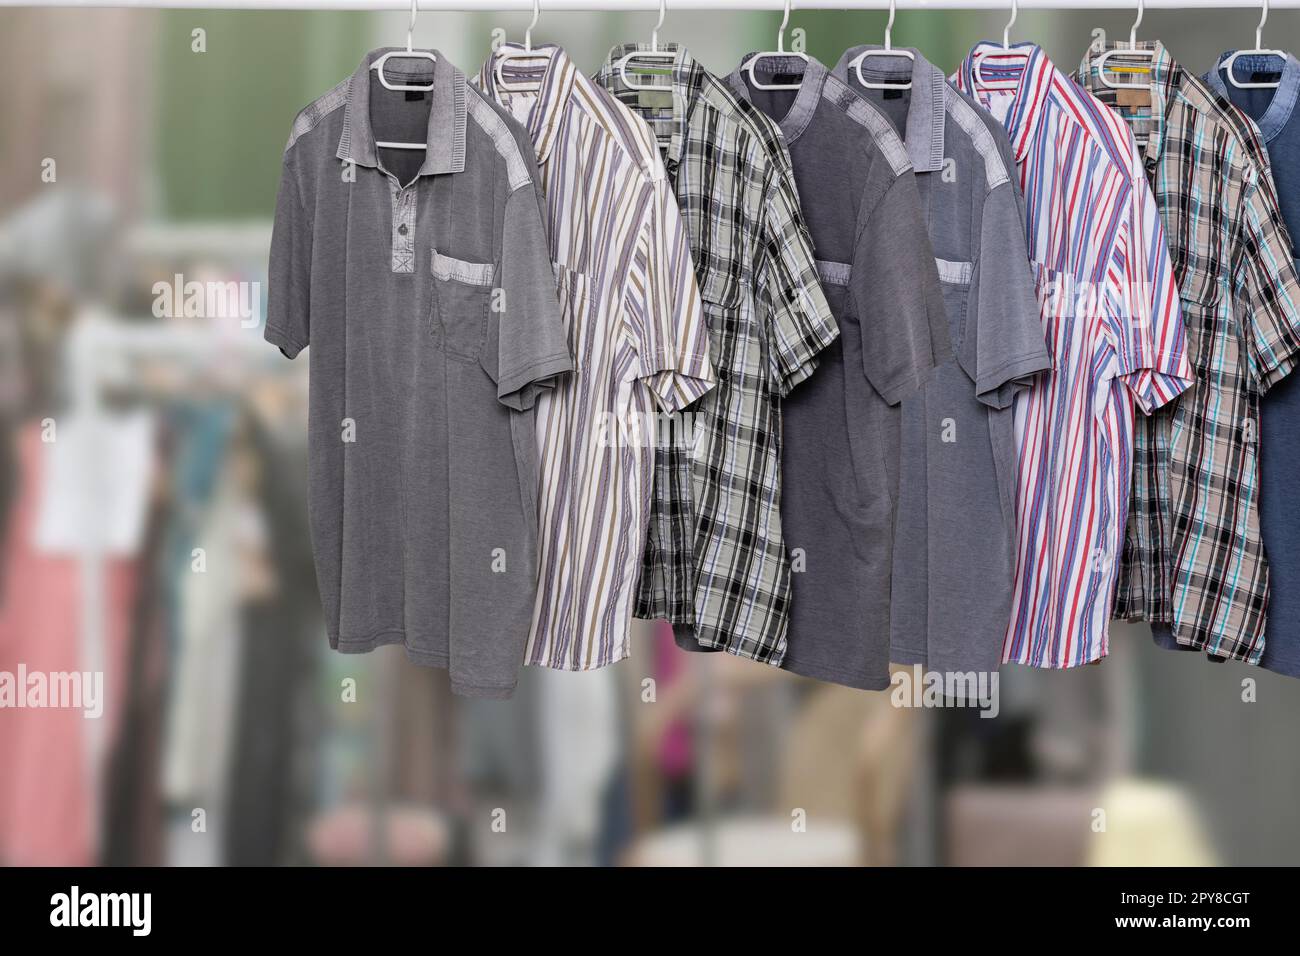 Clothes on rack. Clothing rack with various colorful male casual summer shirts over abstract blurred clothes shop. All hanging neatly on hangers at cloth rail. Space. Shopping. Stock Photo